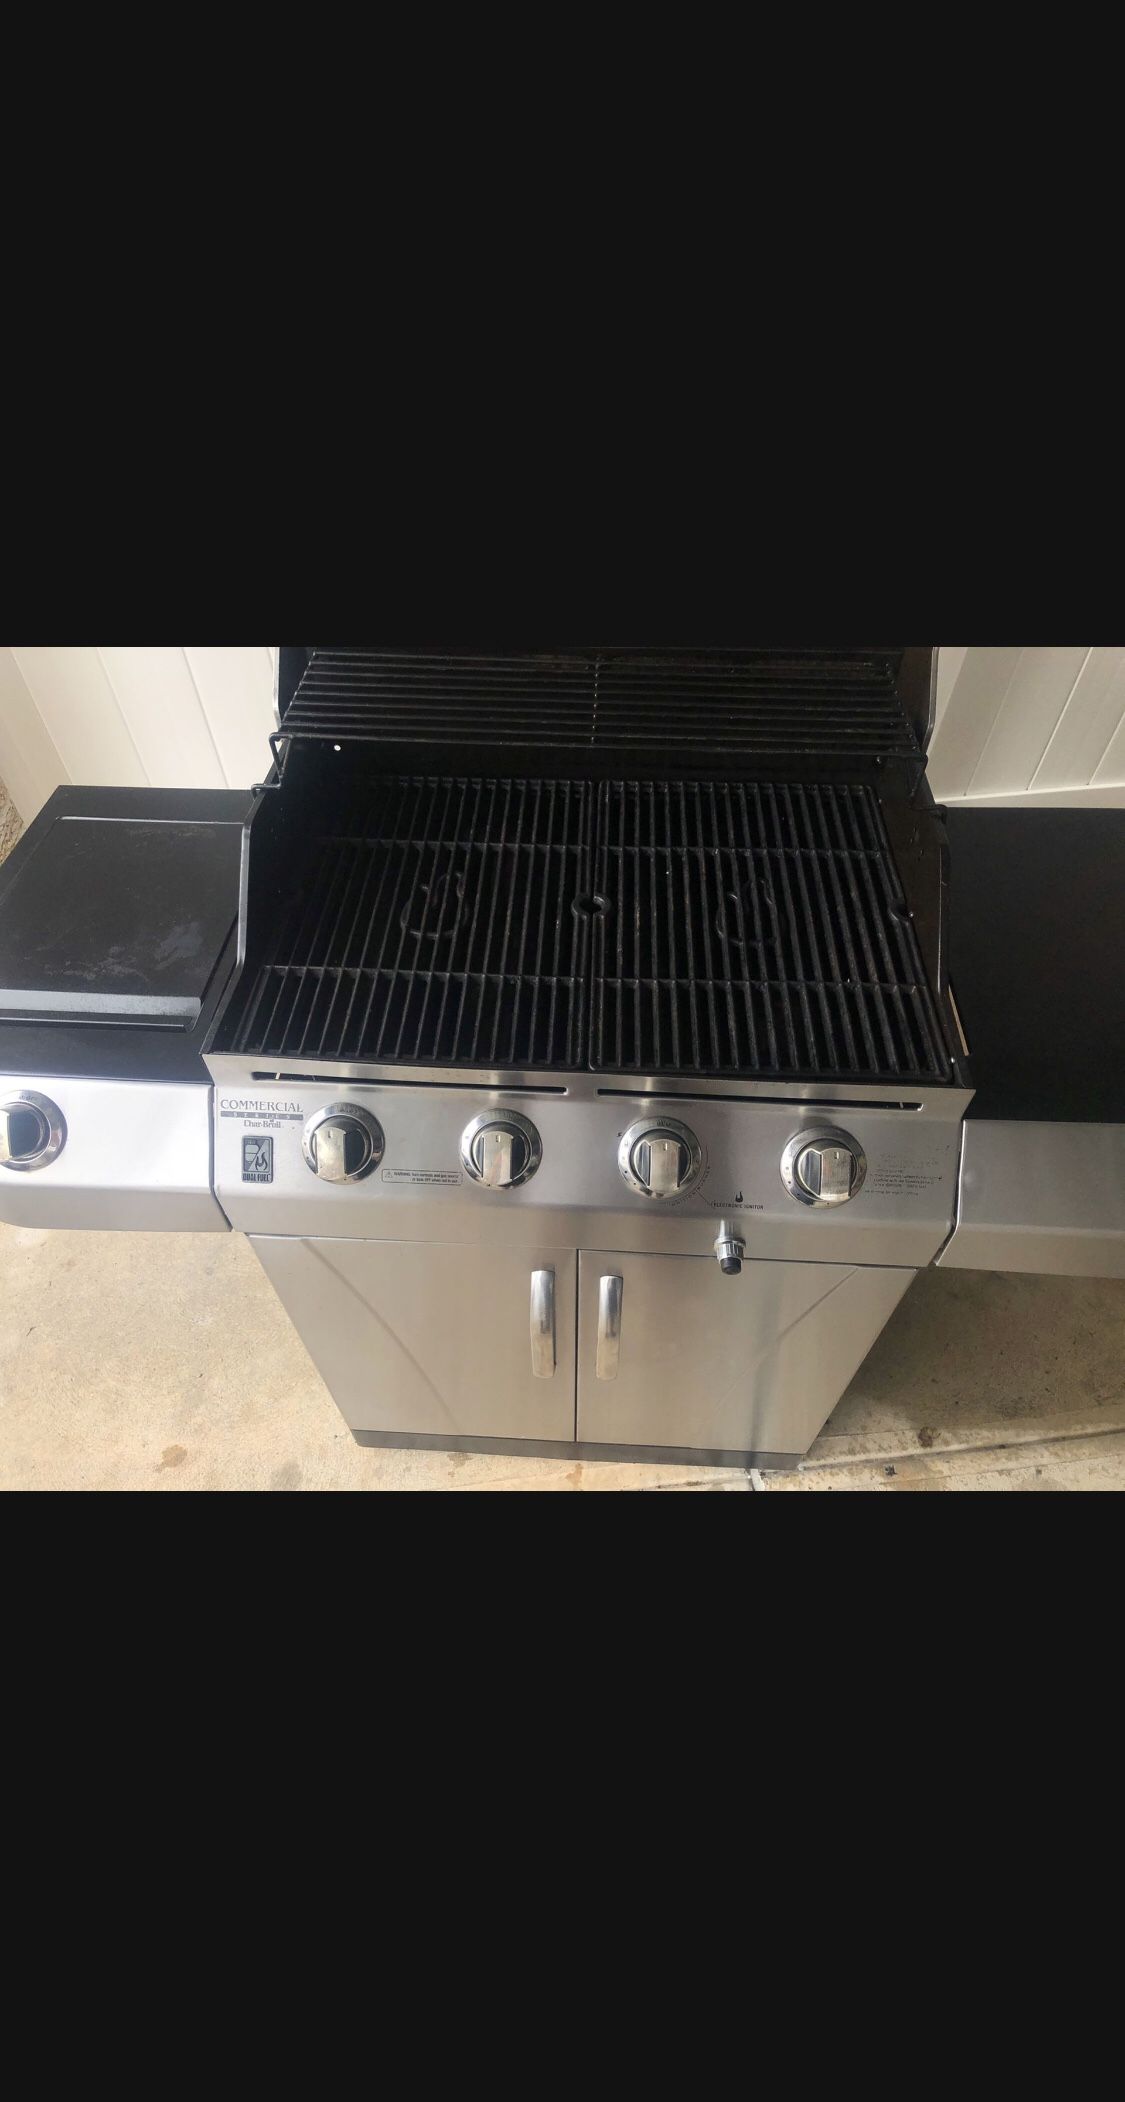 Char-Broil commercial series bbq grill 4 burner